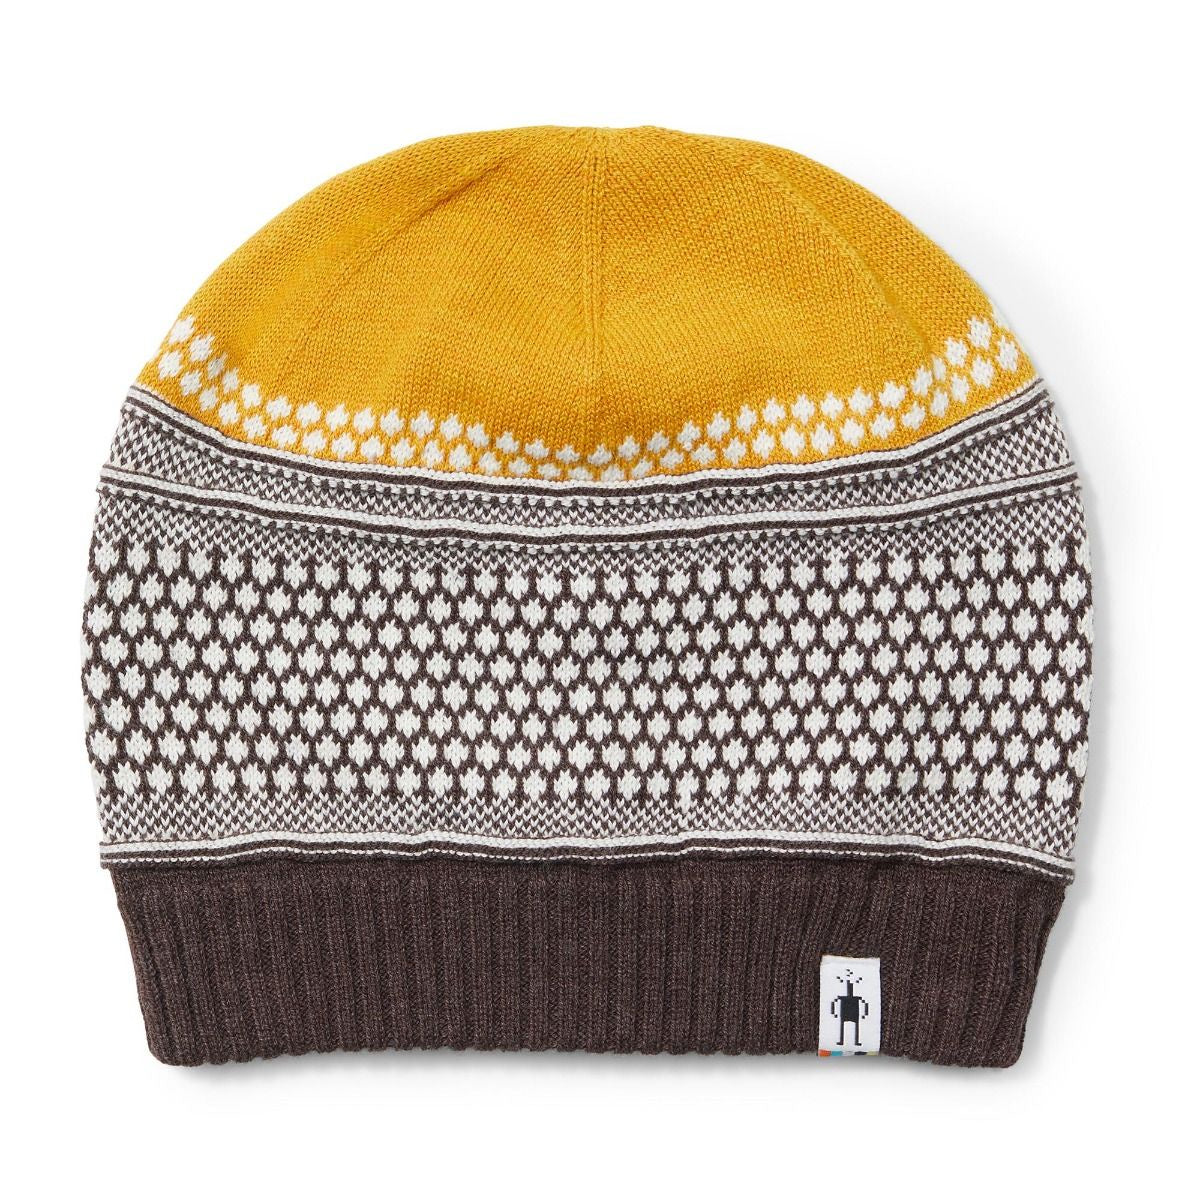 SMARTWOOL - POPCORN CABLE BEANIE IN HONEY GOLD HEATHER